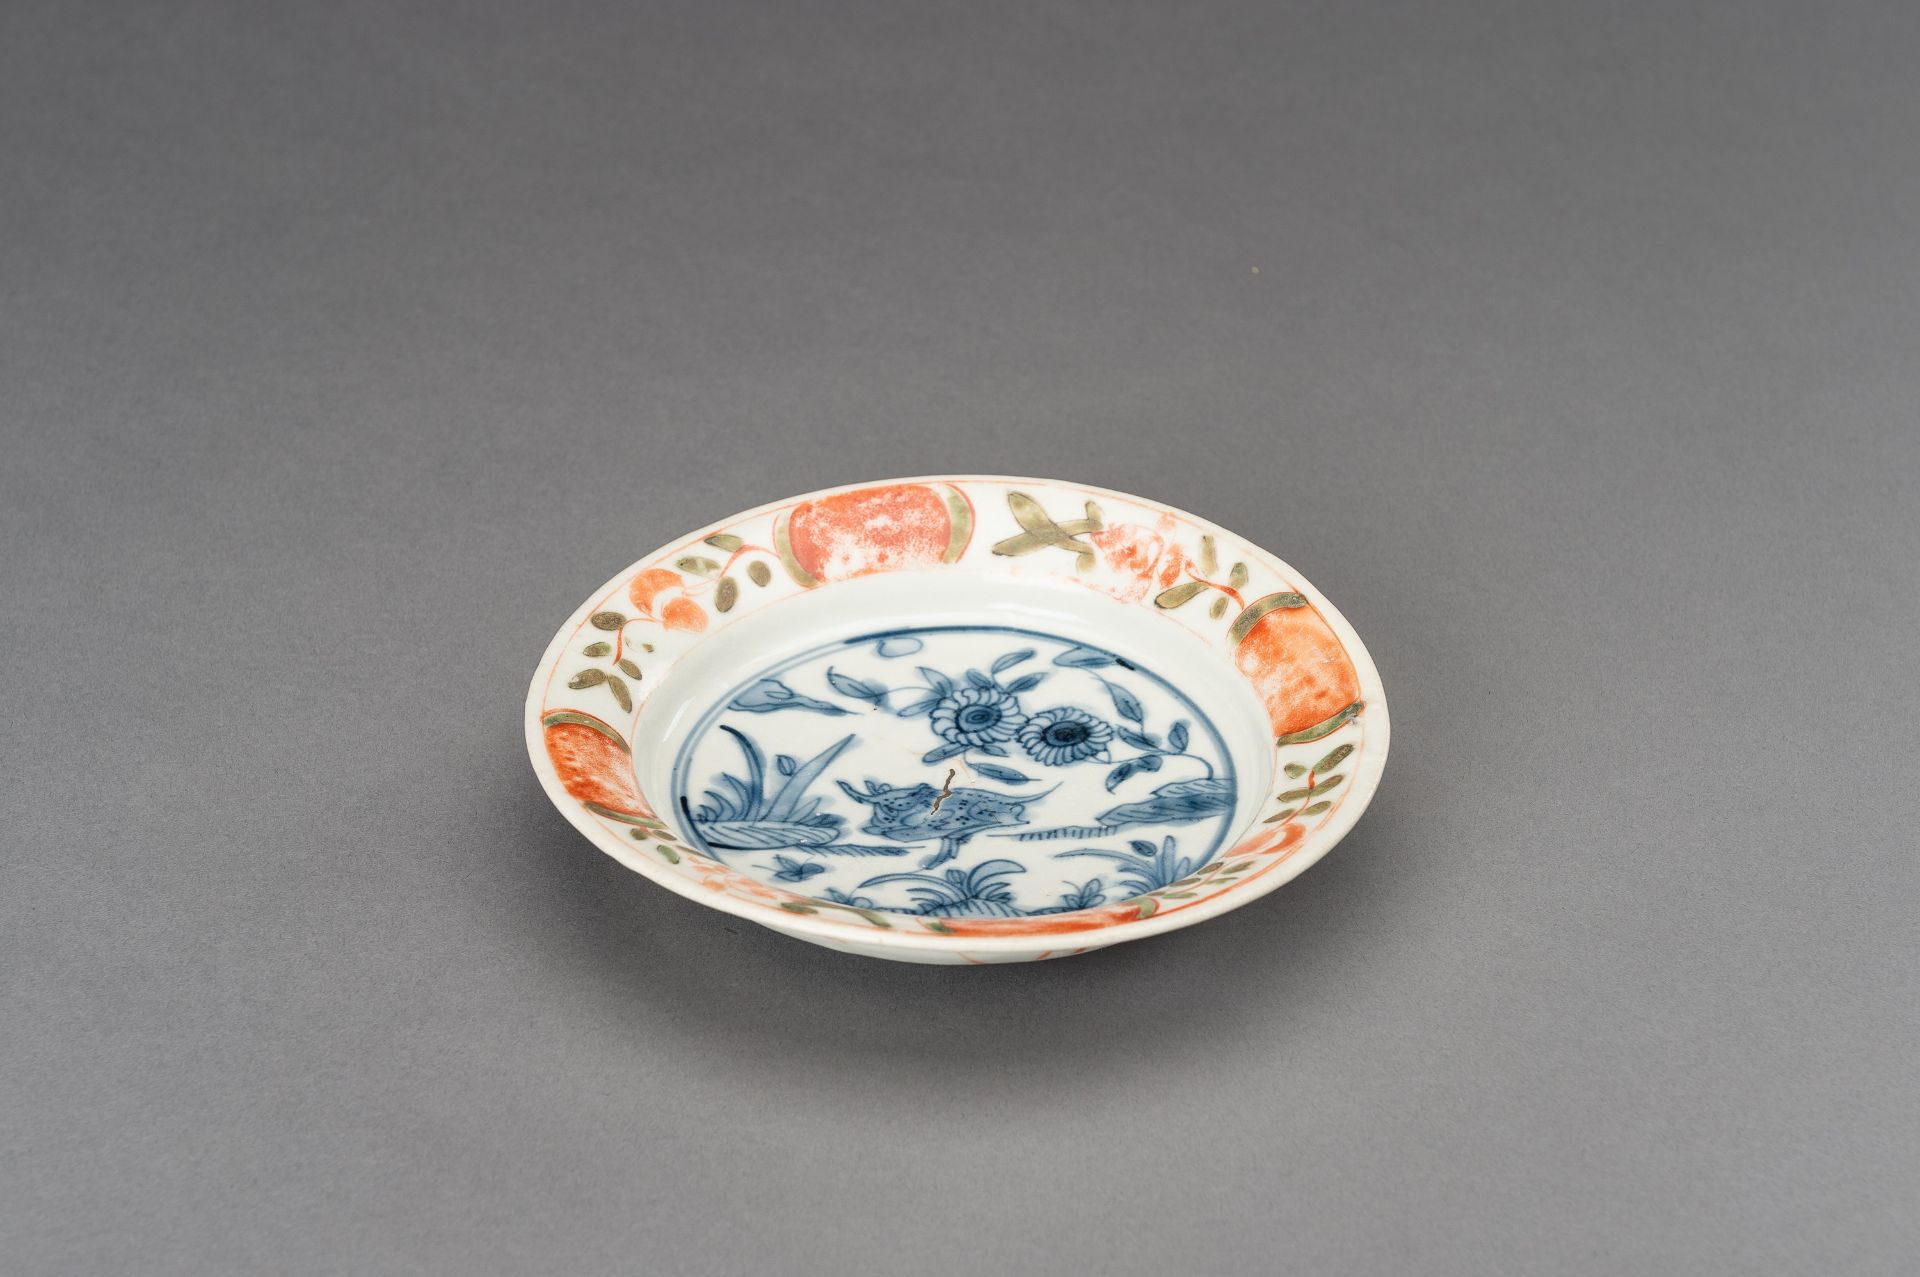 A BLUE AND WHITE 'DEER AND CHRYSANTHEMUM' PORCELAIN DISH, MING - Image 6 of 10